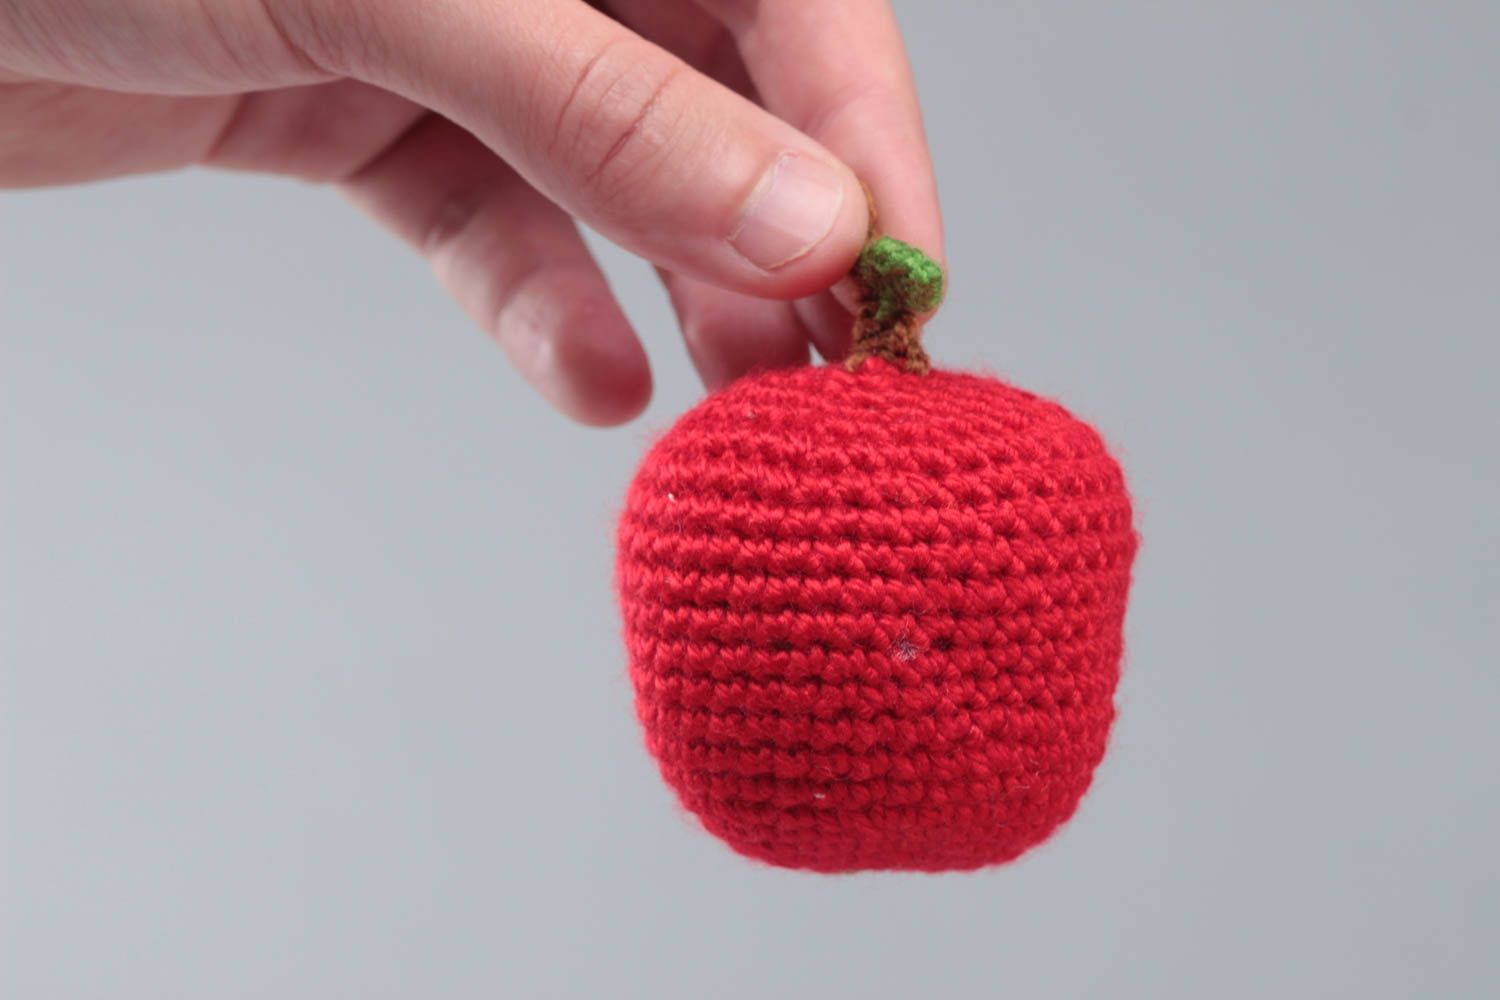 Handmade small crochet soft toy red apple for kids and interior decoration photo 5